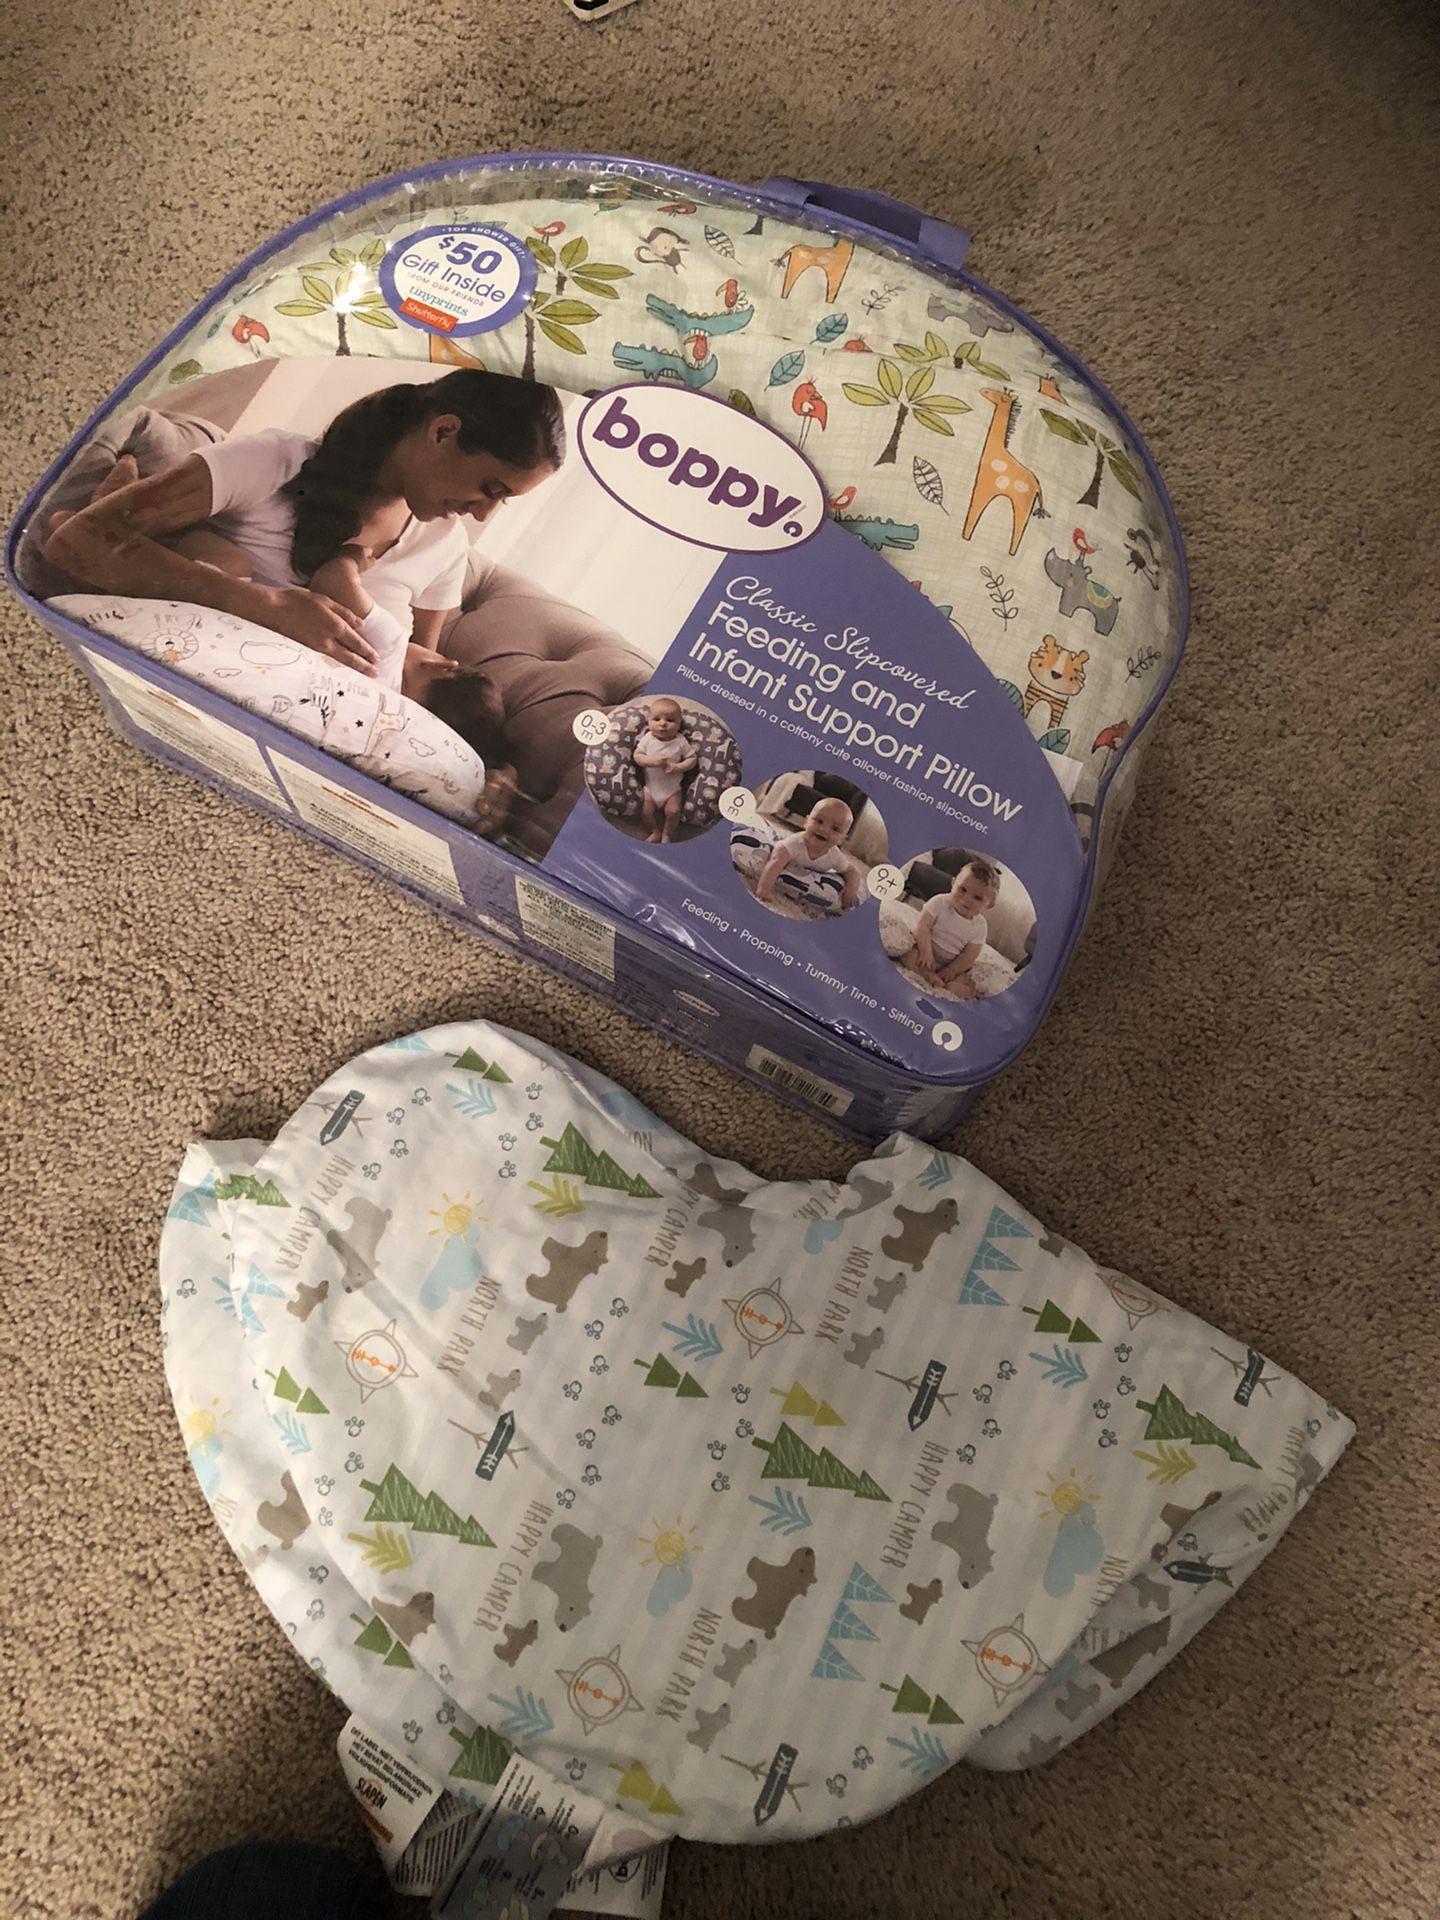 Boppy and baby toys